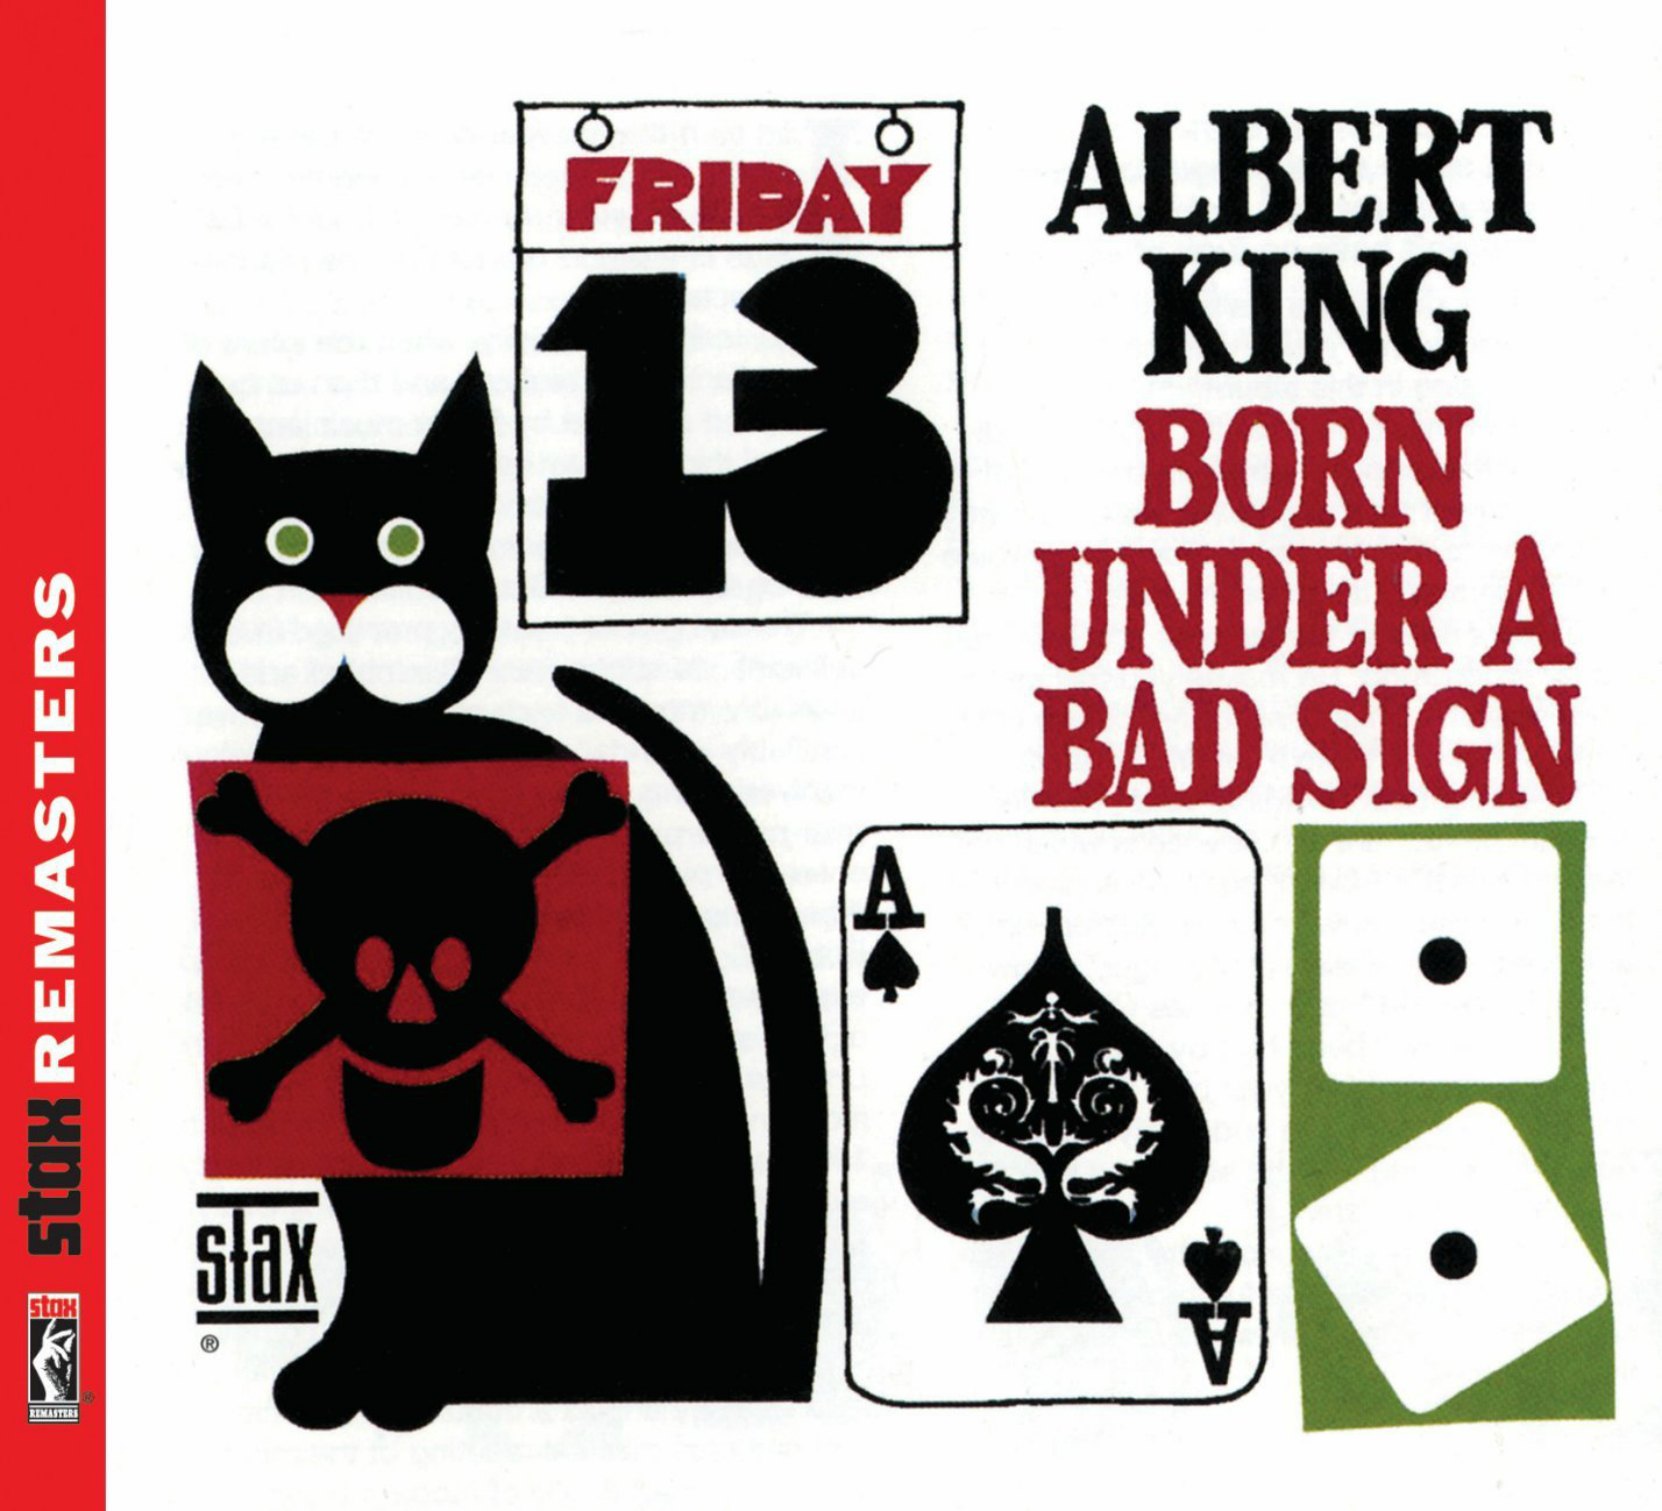 CD cover, Albert King, Born Under A Bad Sign, released on Stax Records.